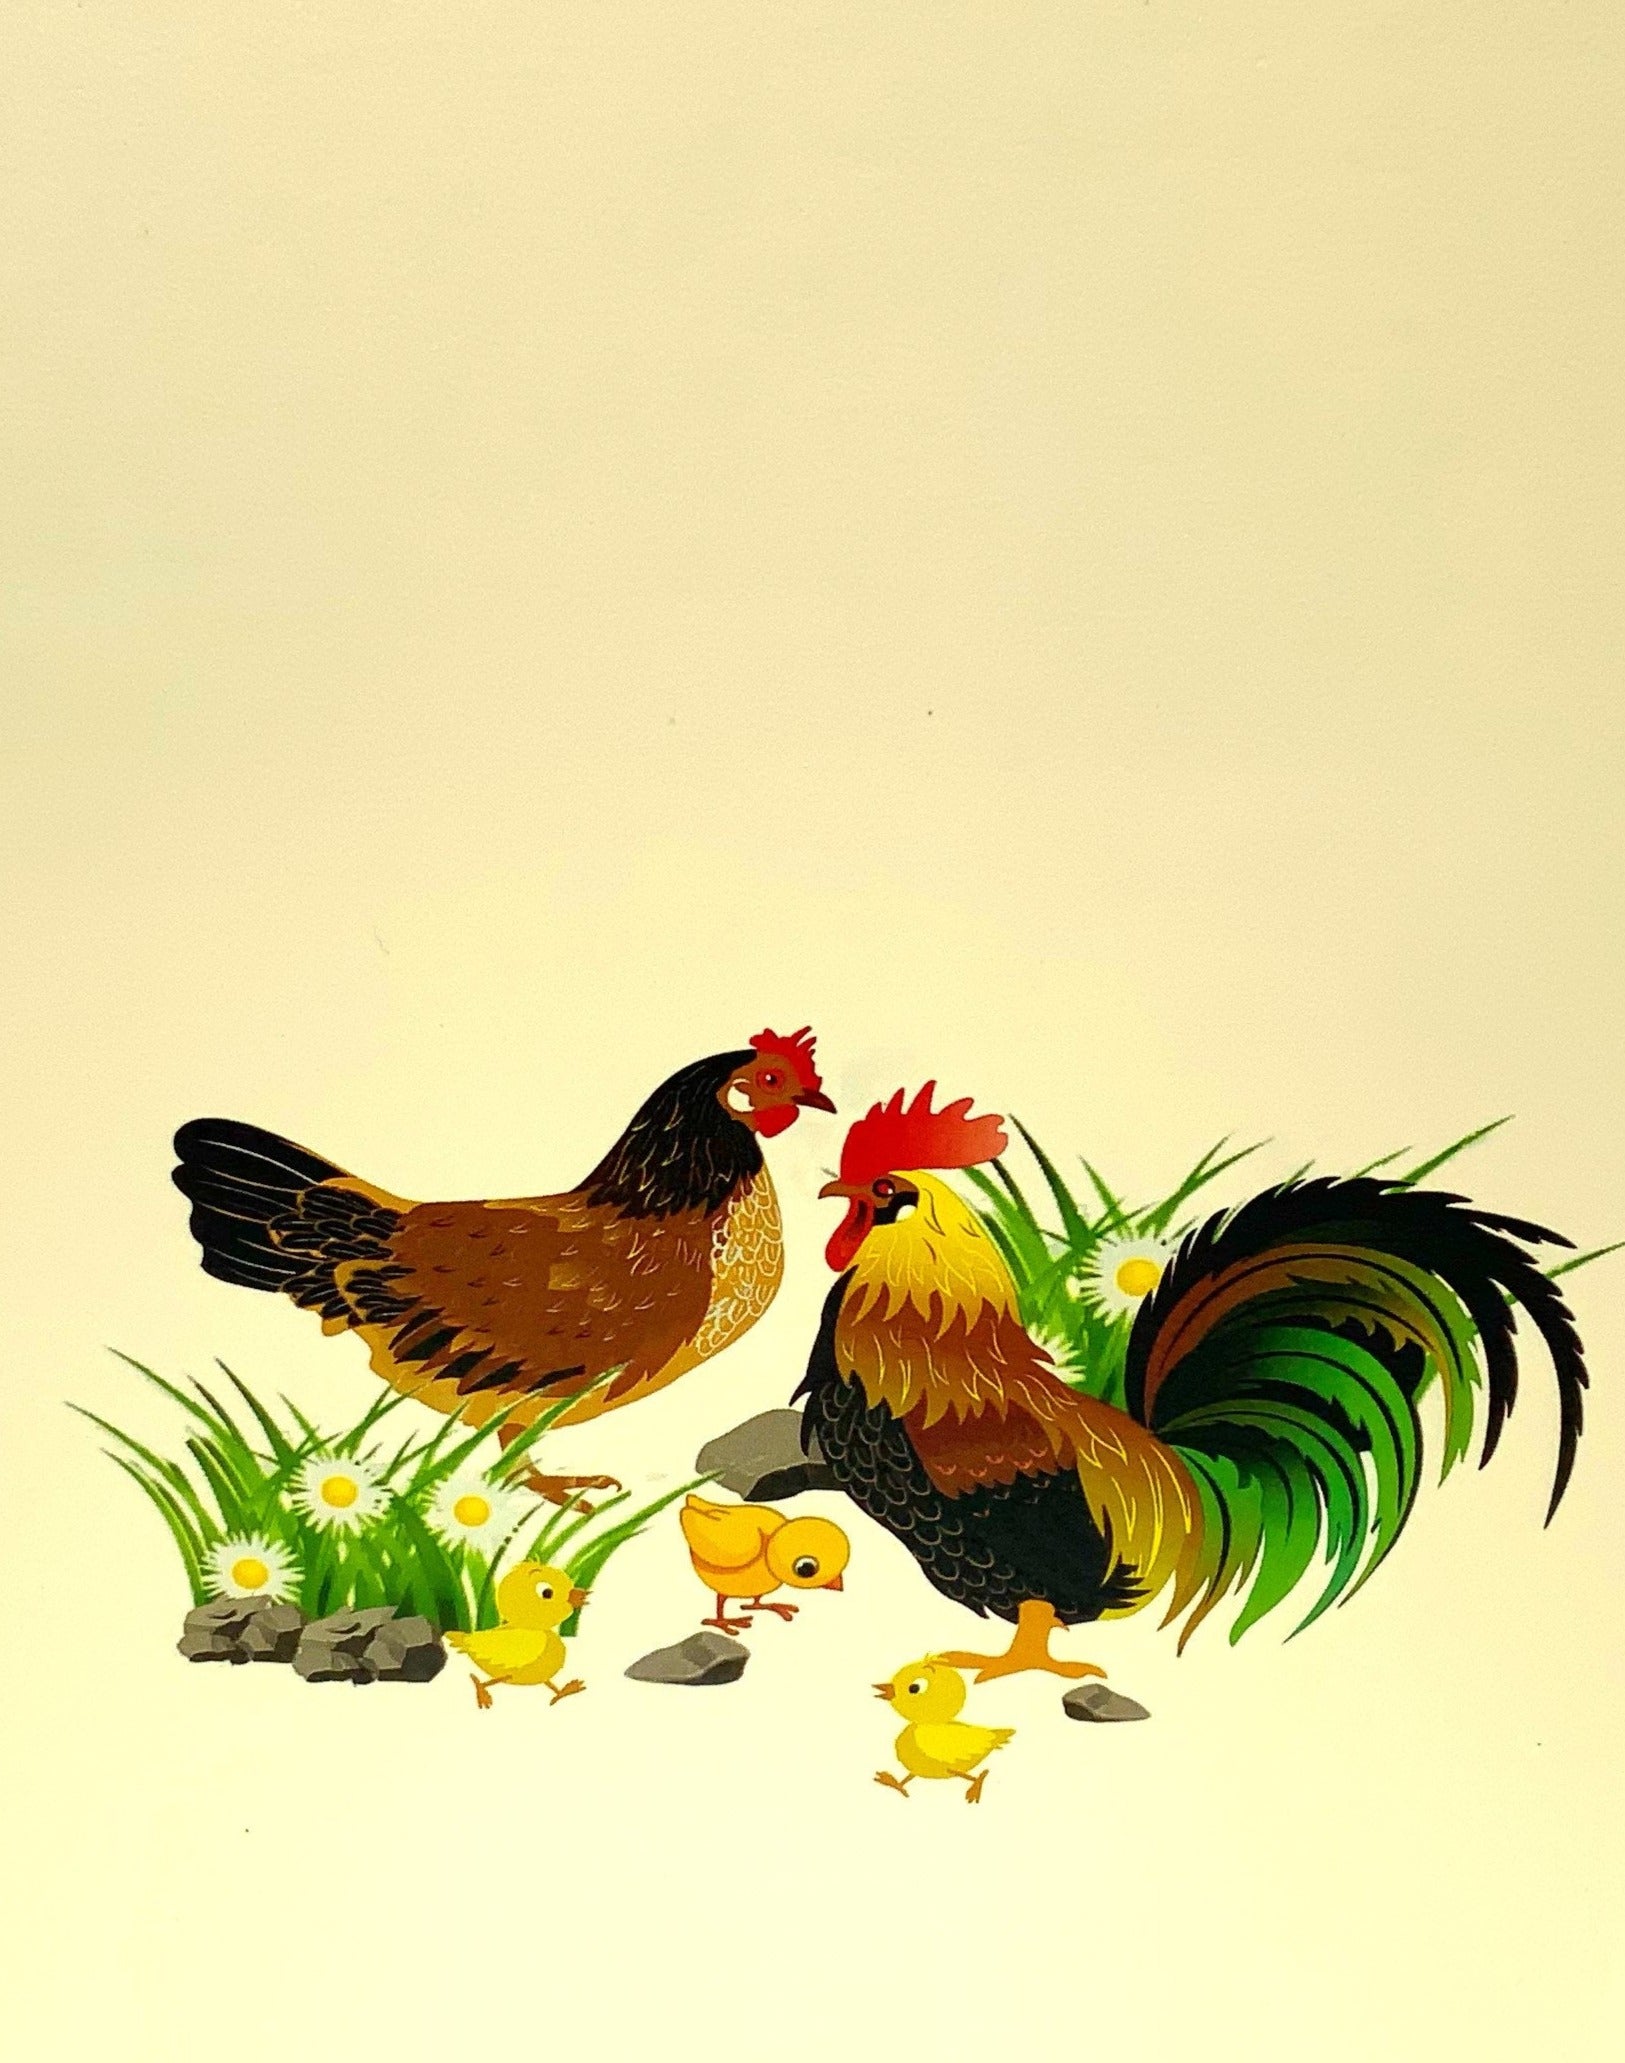 &quot;Front cover of the 2 chickens pop-up card: The card&#39;s cover features an inviting and artistic design with an image that hints at the playful chicken characters inside, providing a glimpse of the intricate 3D pop-up.&quot;